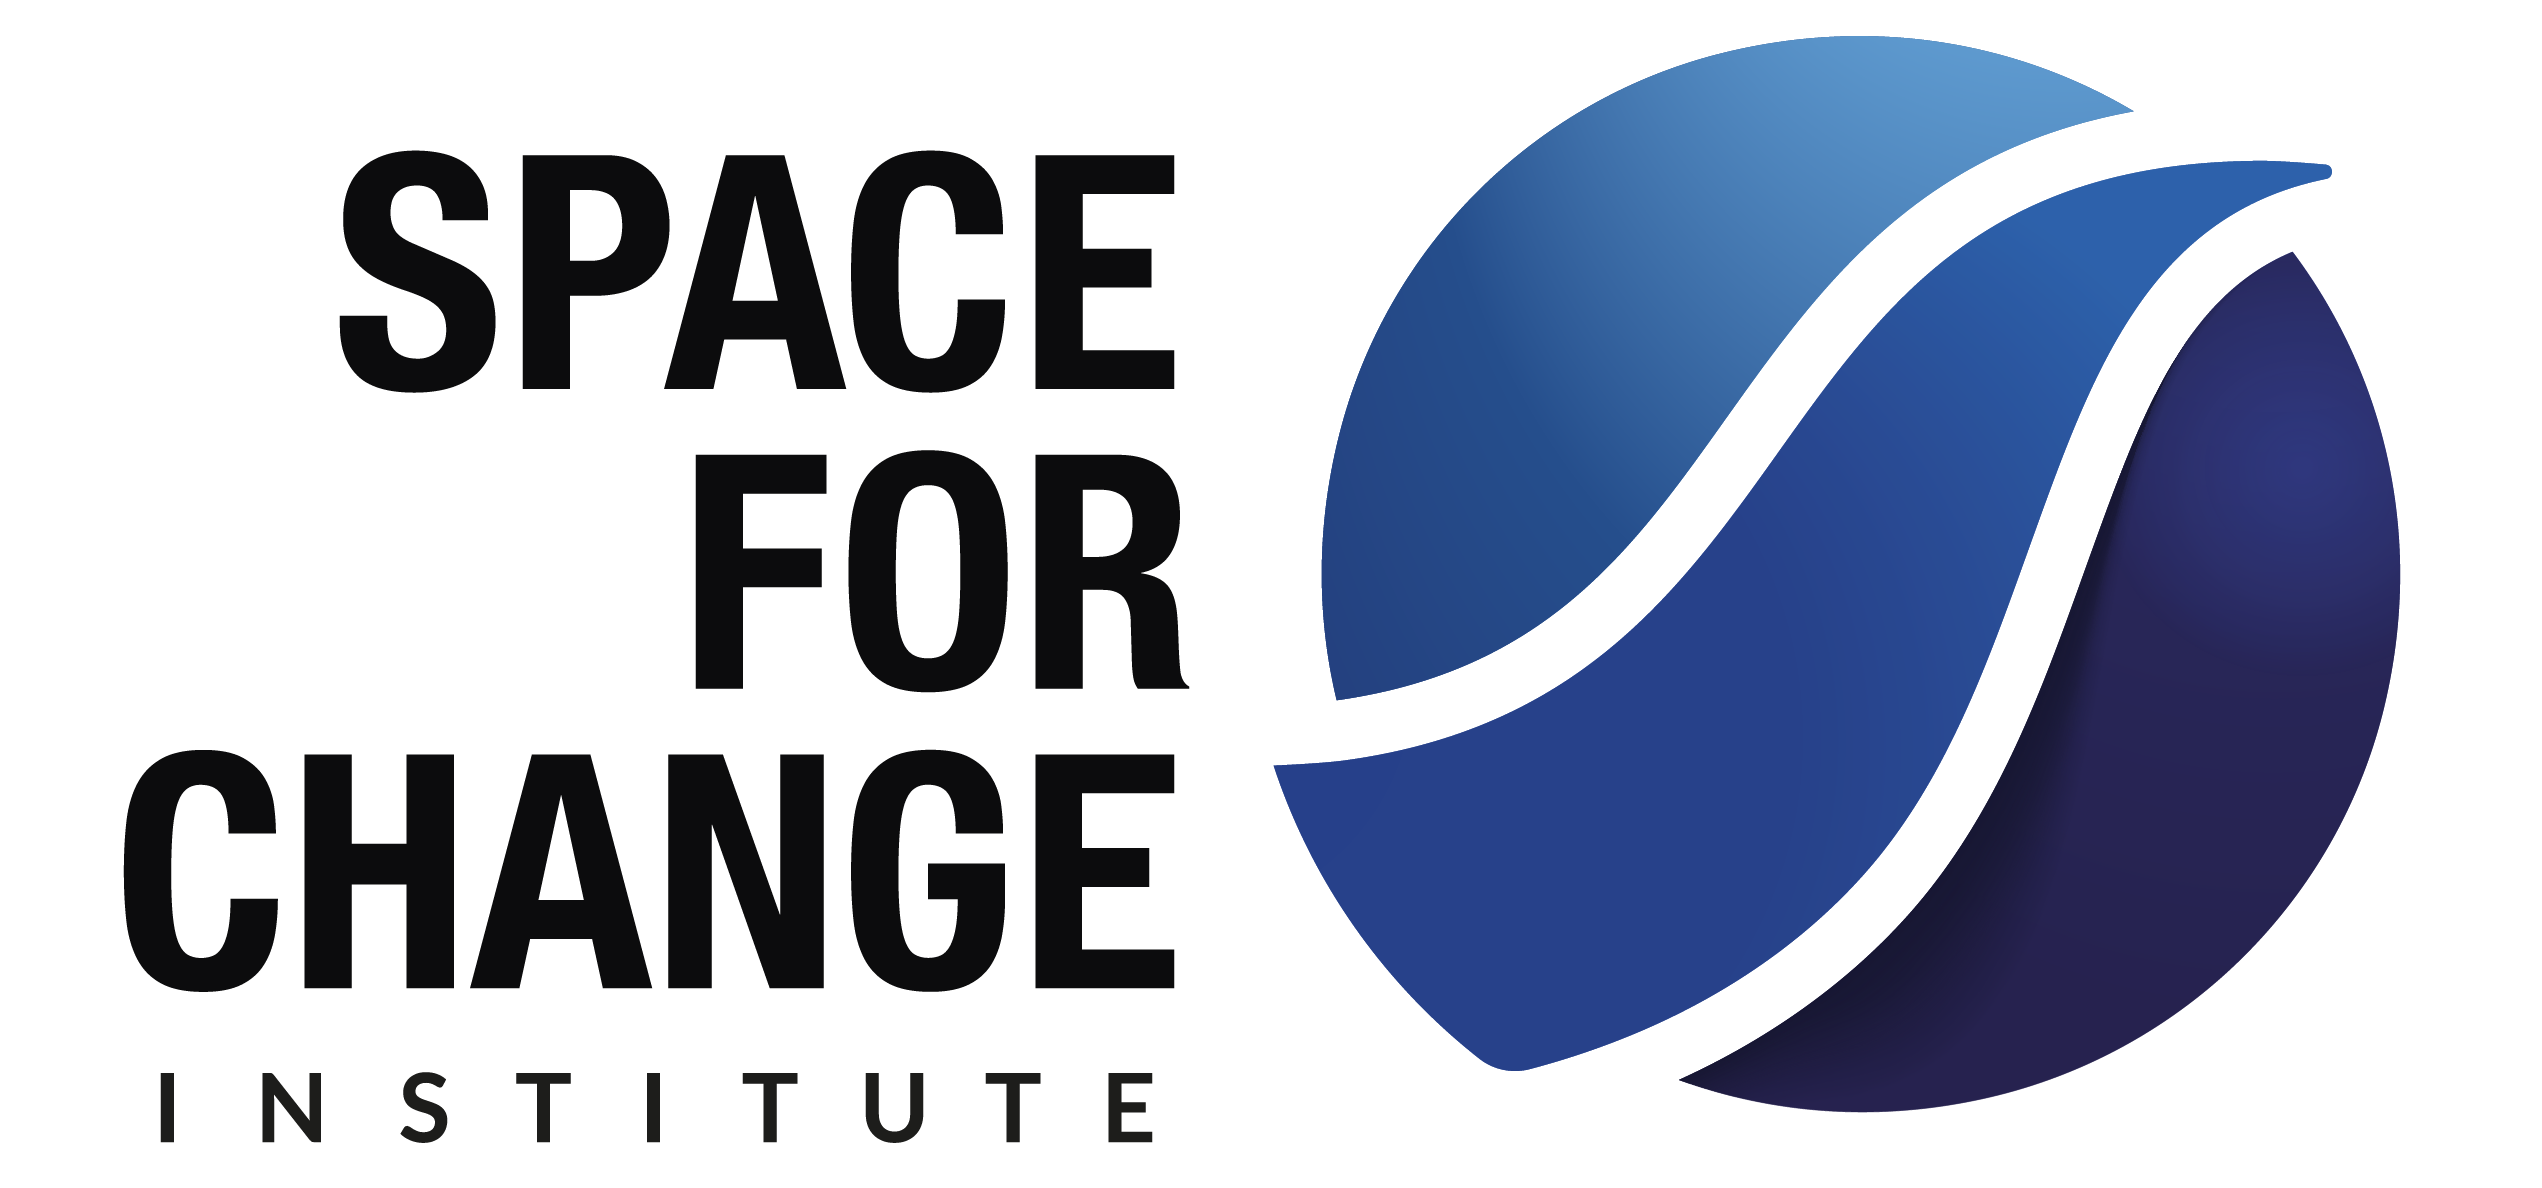 Space for Change Institute